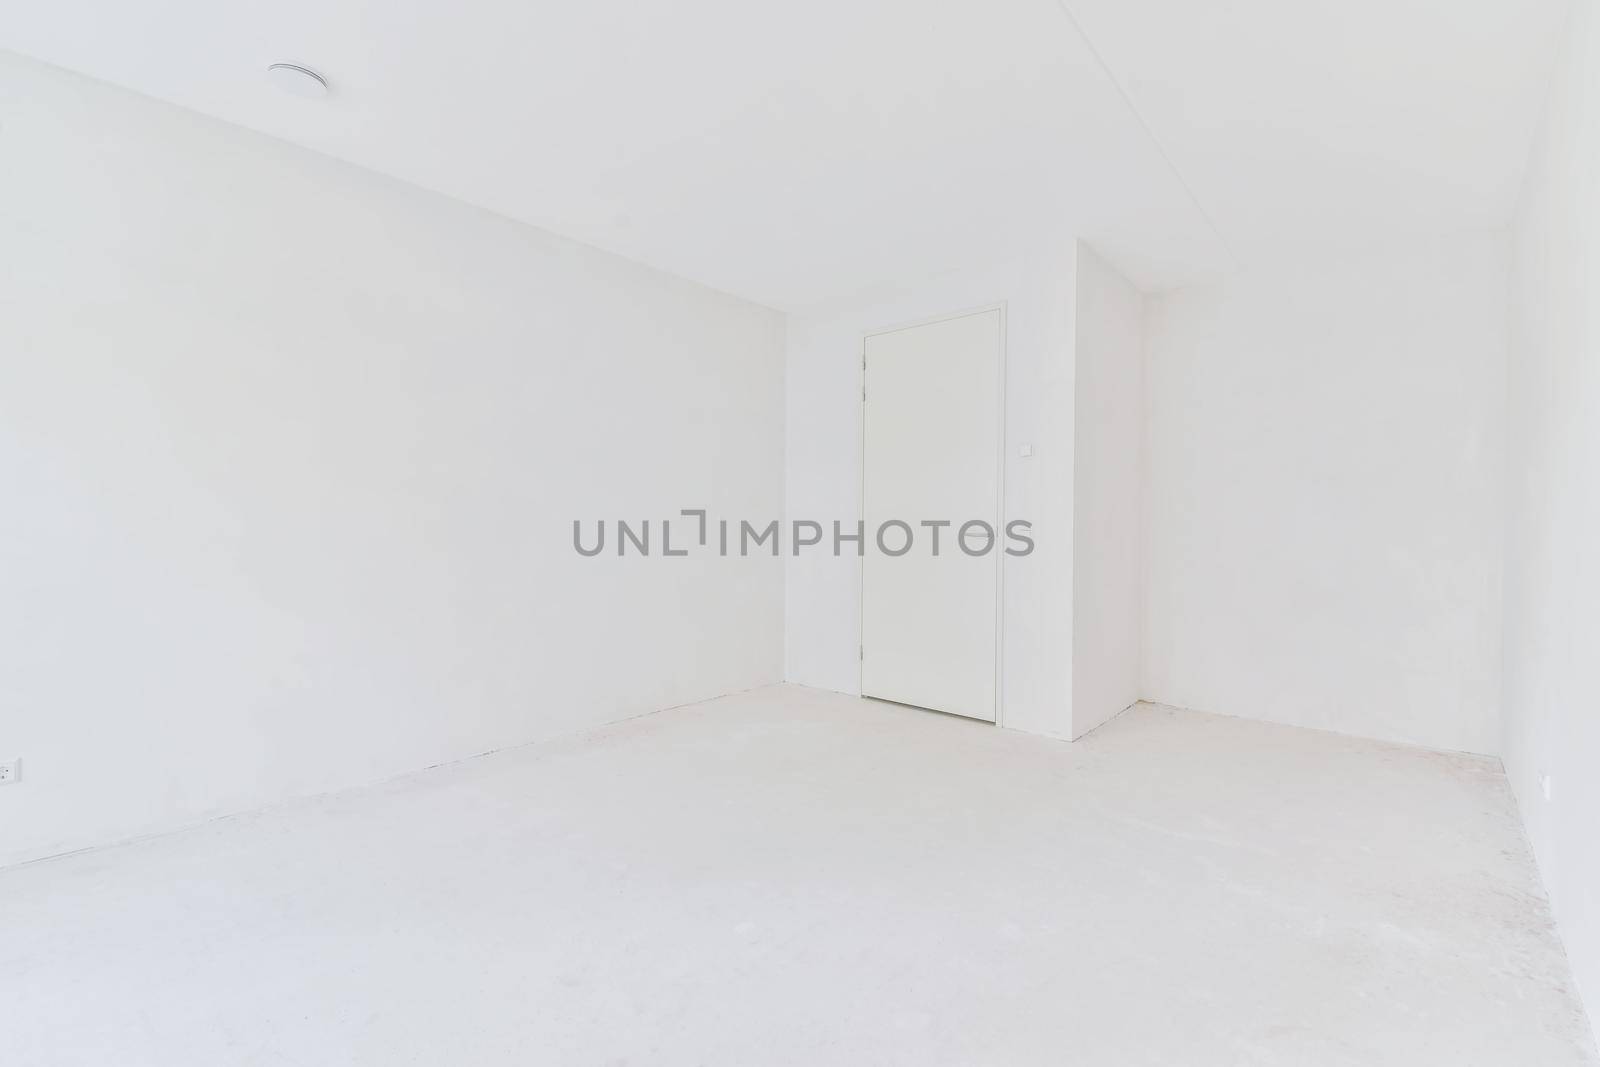 A completely white room in an elegant apartment